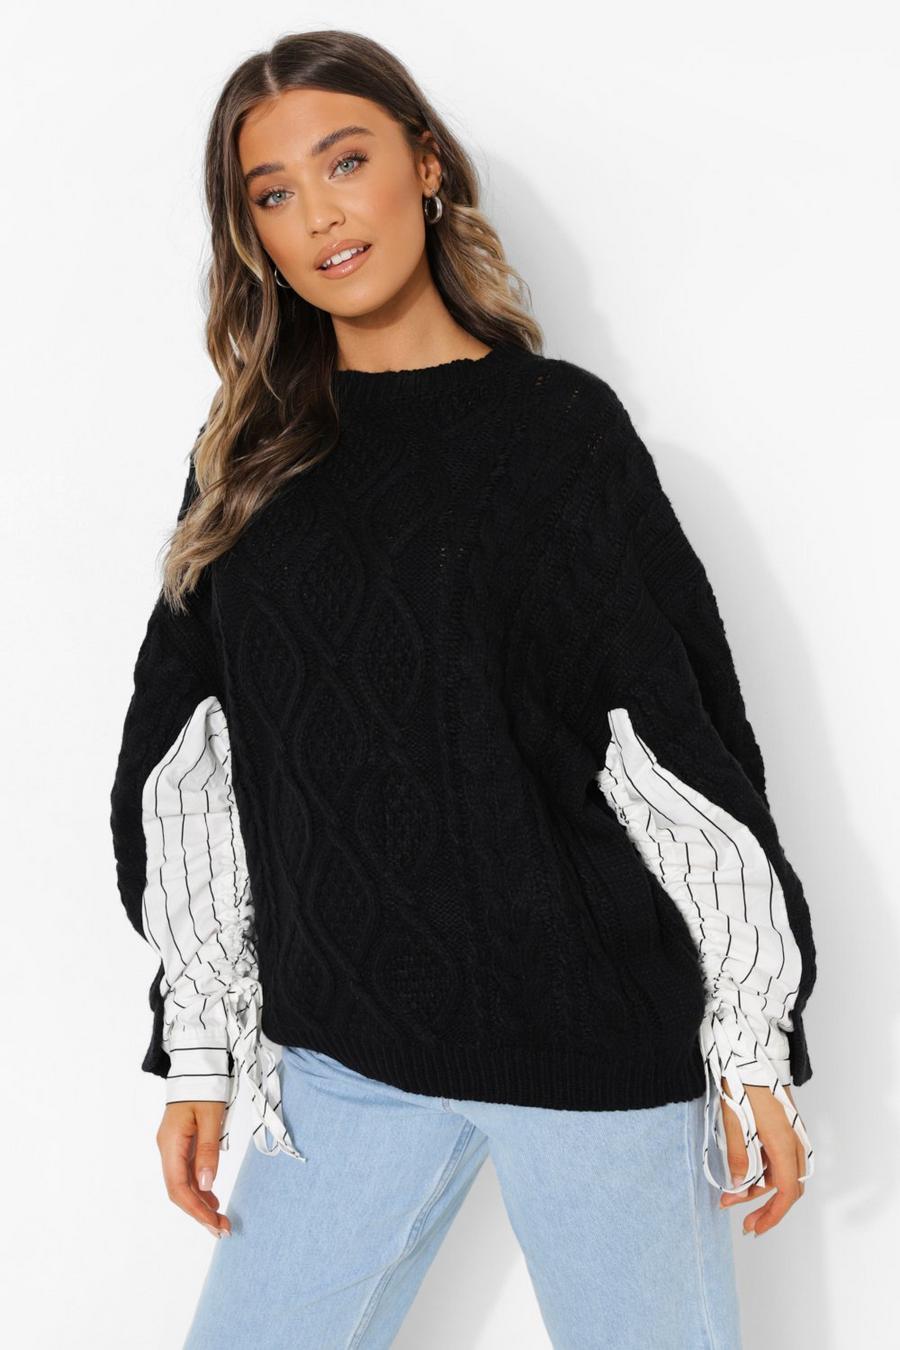 Black Cable Knitted Sweater With Shirt Sleeve Detail image number 1